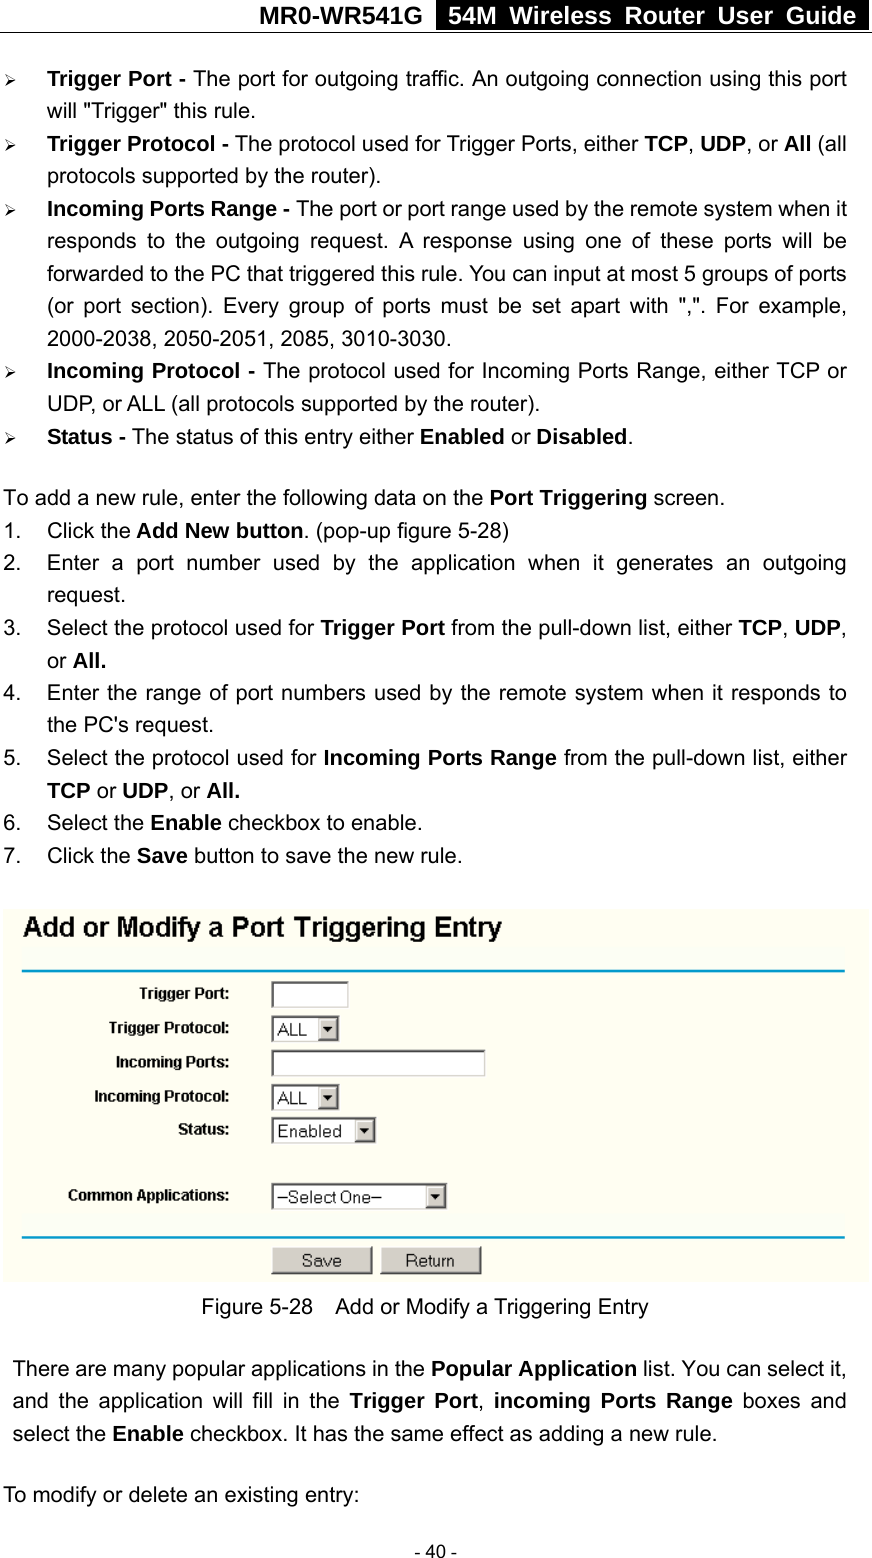 MR0-WR541G   54M Wireless Router User Guide  ¾ Trigger Port - The port for outgoing traffic. An outgoing connection using this port will &quot;Trigger&quot; this rule. ¾ Trigger Protocol - The protocol used for Trigger Ports, either TCP, UDP, or All (all protocols supported by the router). ¾ Incoming Ports Range - The port or port range used by the remote system when it responds to the outgoing request. A response using one of these ports will be forwarded to the PC that triggered this rule. You can input at most 5 groups of ports (or port section). Every group of ports must be set apart with &quot;,&quot;. For example, 2000-2038, 2050-2051, 2085, 3010-3030. ¾ Incoming Protocol - The protocol used for Incoming Ports Range, either TCP or UDP, or ALL (all protocols supported by the router). ¾ Status - The status of this entry either Enabled or Disabled. To add a new rule, enter the following data on the Port Triggering screen.   1. Click the Add New button. (pop-up figure 5-28) 2.  Enter a port number used by the application when it generates an outgoing request.   3.  Select the protocol used for Trigger Port from the pull-down list, either TCP, UDP, or All. 4.  Enter the range of port numbers used by the remote system when it responds to the PC&apos;s request. 5.  Select the protocol used for Incoming Ports Range from the pull-down list, either TCP or UDP, or All. 6. Select the Enable checkbox to enable.   7. Click the Save button to save the new rule.  Figure 5-28    Add or Modify a Triggering Entry There are many popular applications in the Popular Application list. You can select it, and the application will fill in the Trigger Port,  incoming Ports Range boxes and select the Enable checkbox. It has the same effect as adding a new rule. To modify or delete an existing entry:  - 40 - 